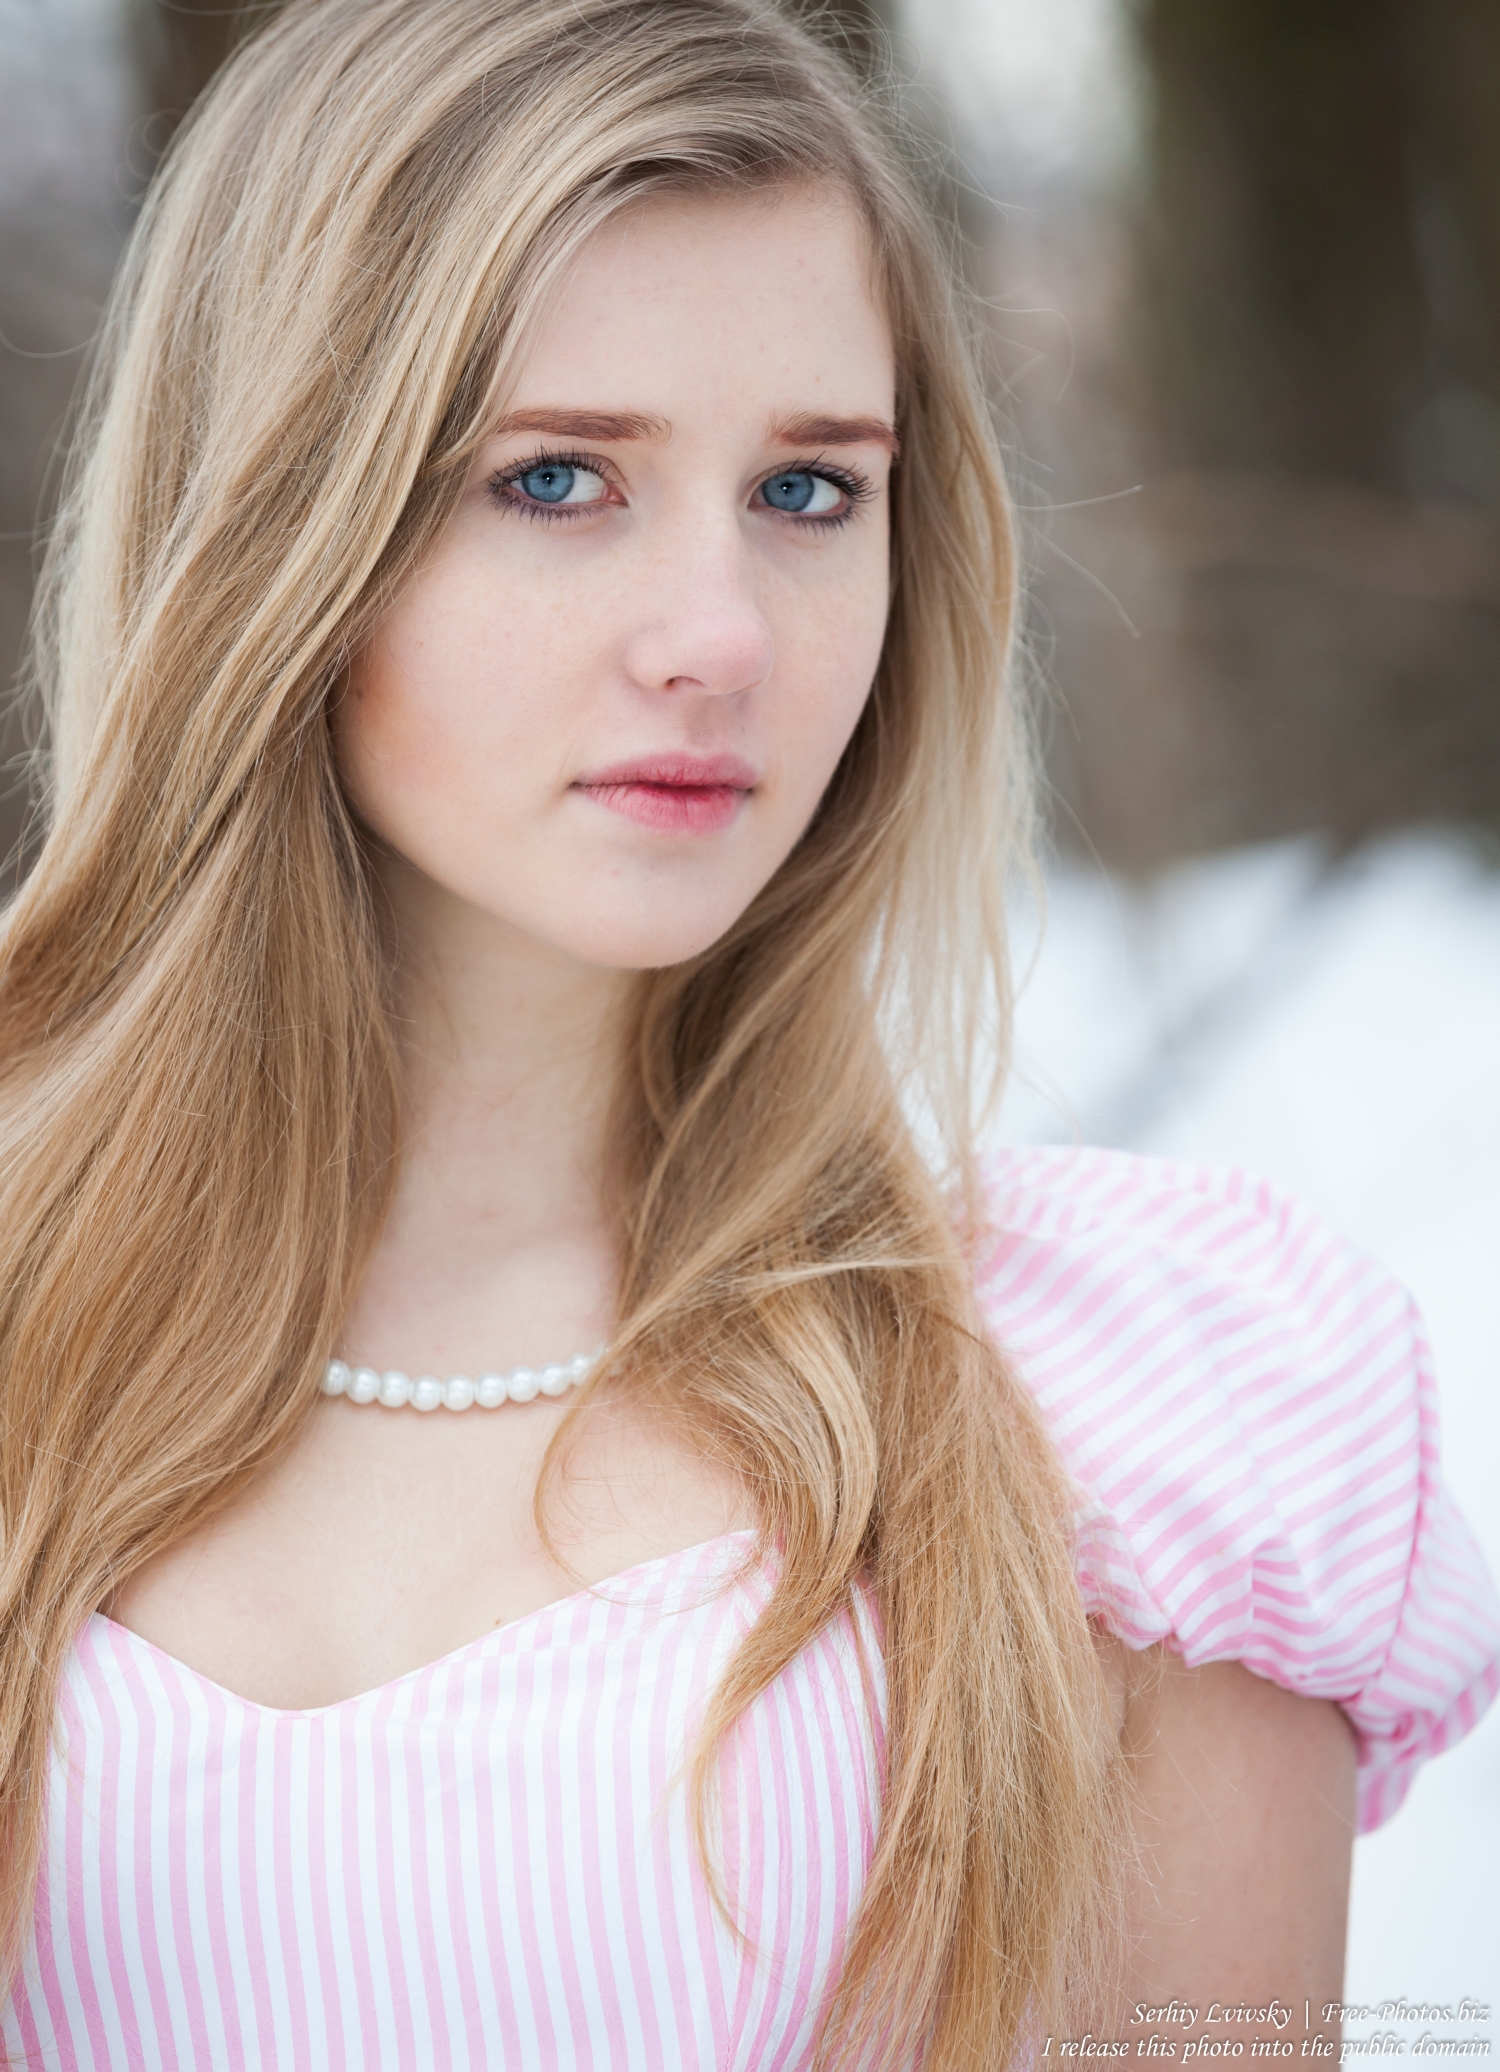 a_natural_blond_17-year-old_girl_photographed_by_serhiy_lvivsky_in_january_2016_08